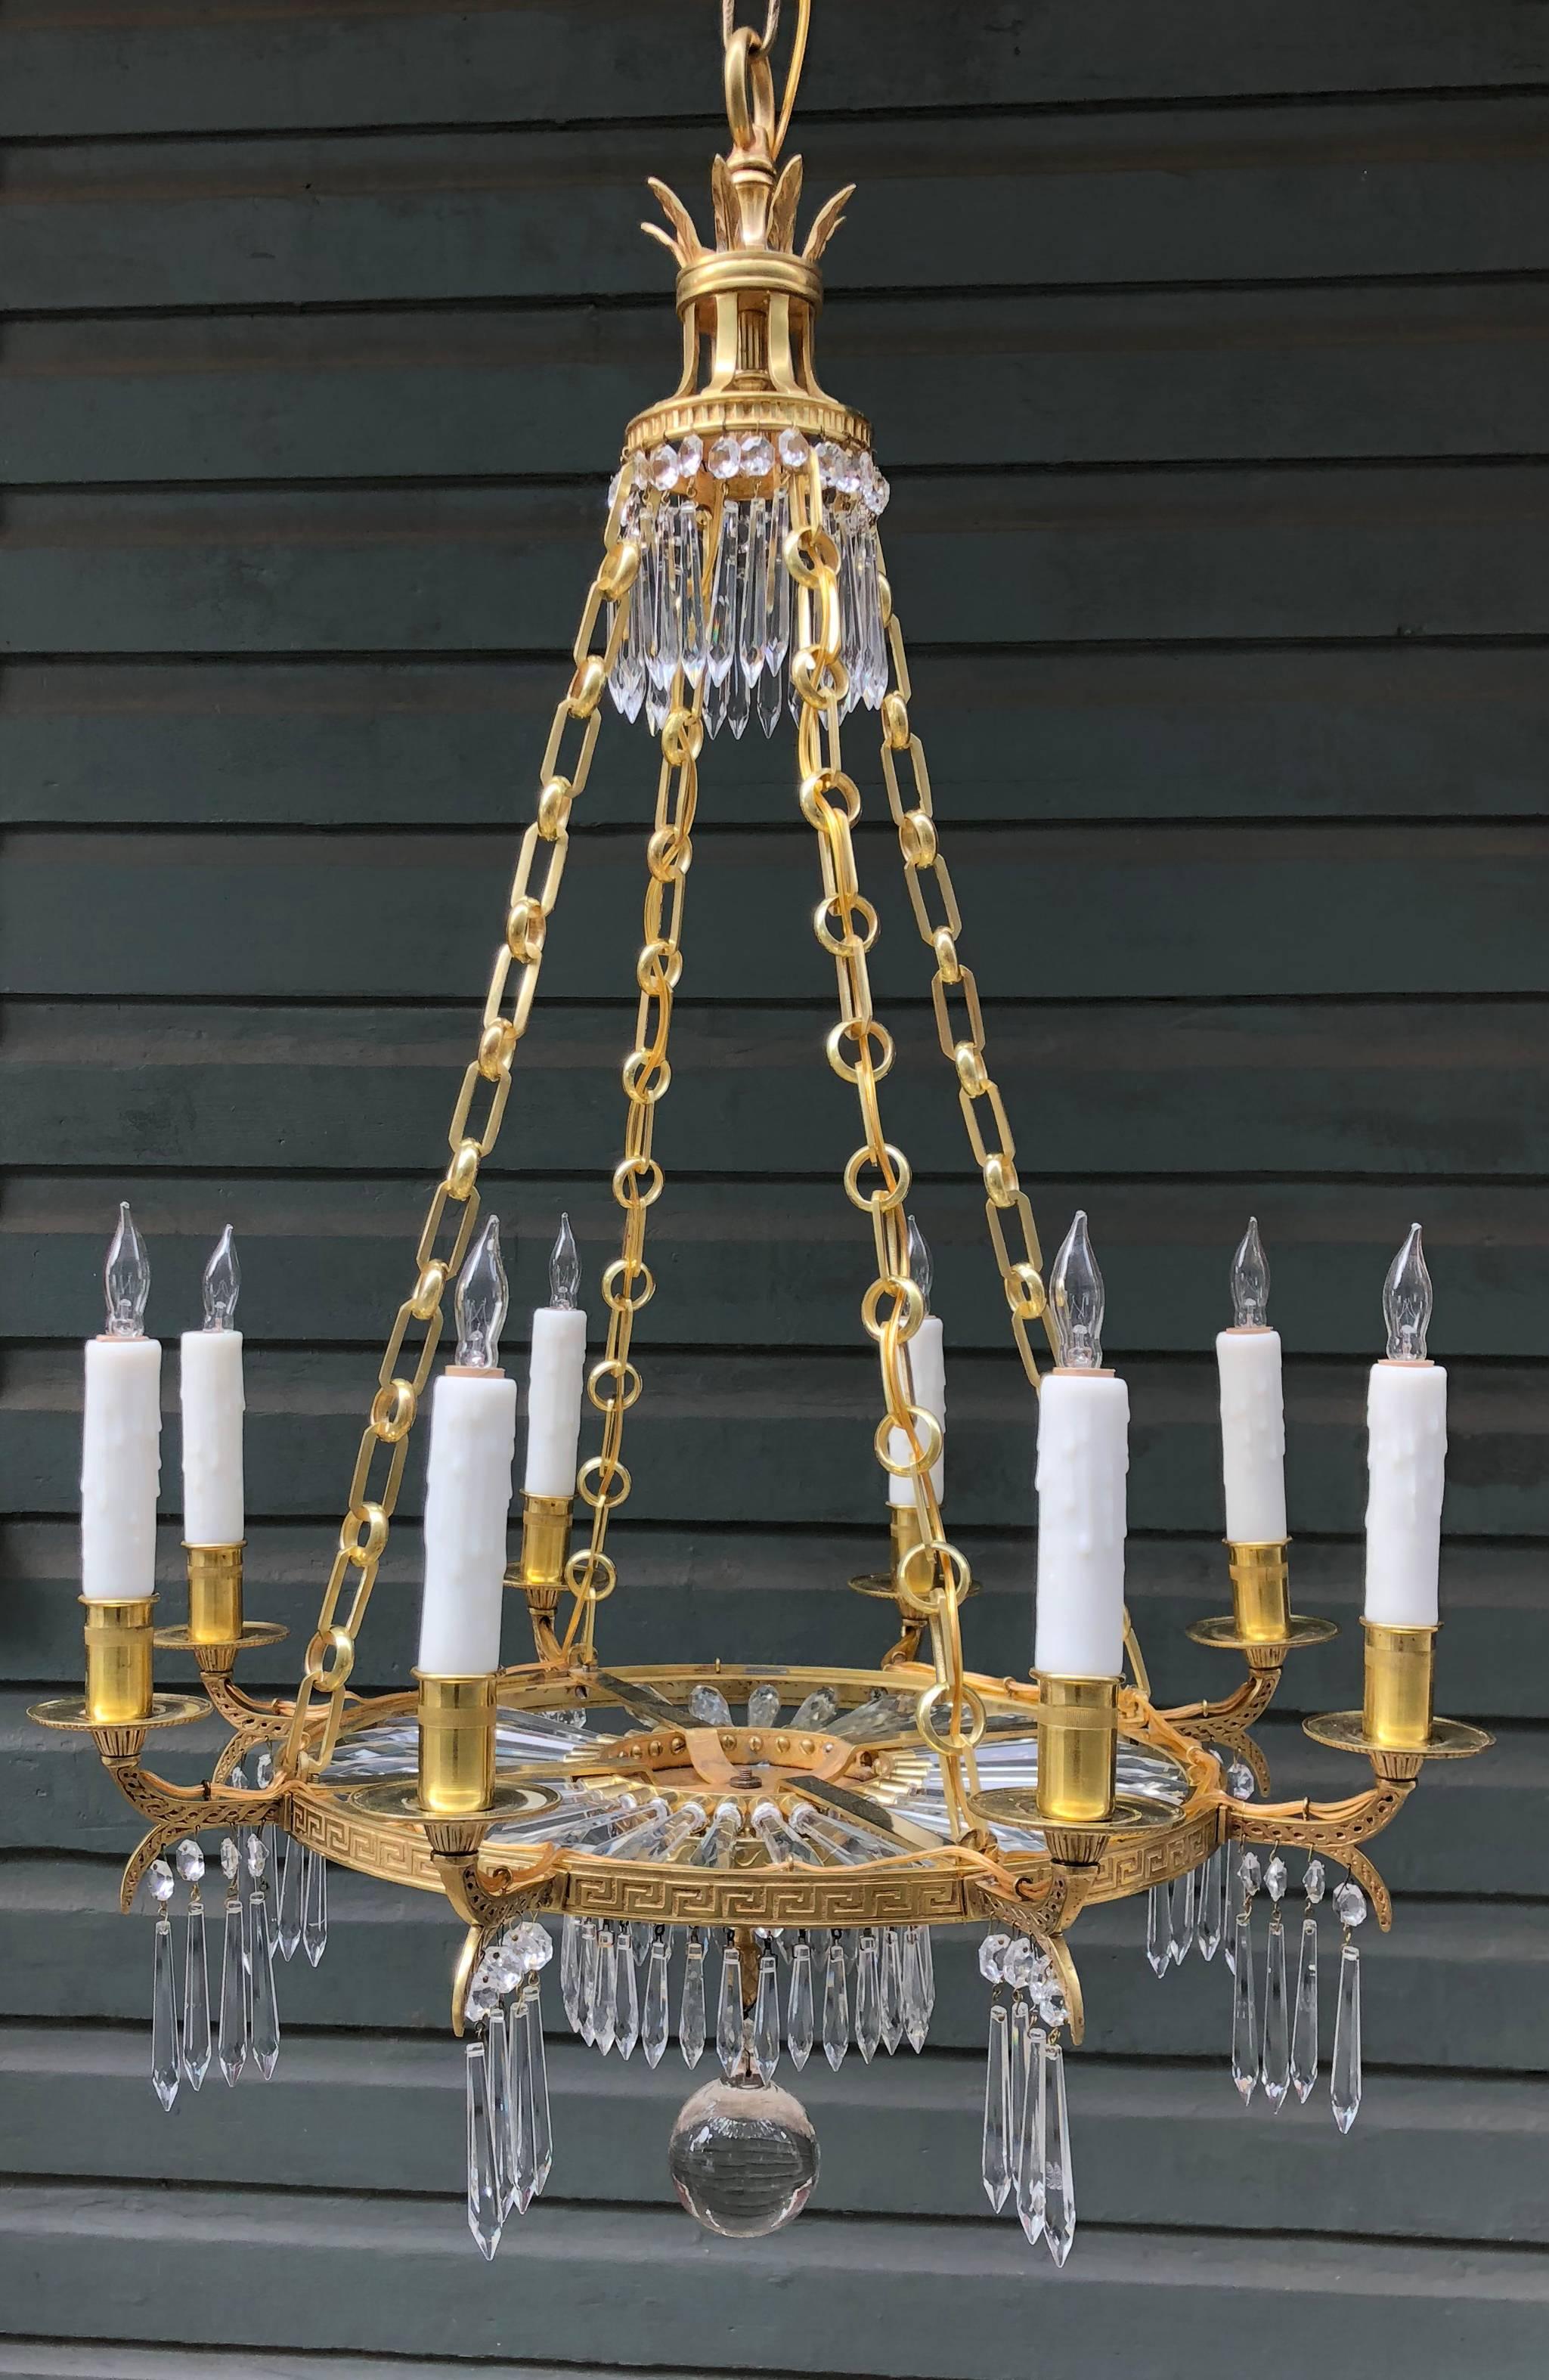 This early 20th century New York chandelier is attributed to Caldwell. This doré bronze chandelier is accented with a Greek key and eight stylized palm frond arms with Regency bobeches. Wonderful crystal sunburst bottom.